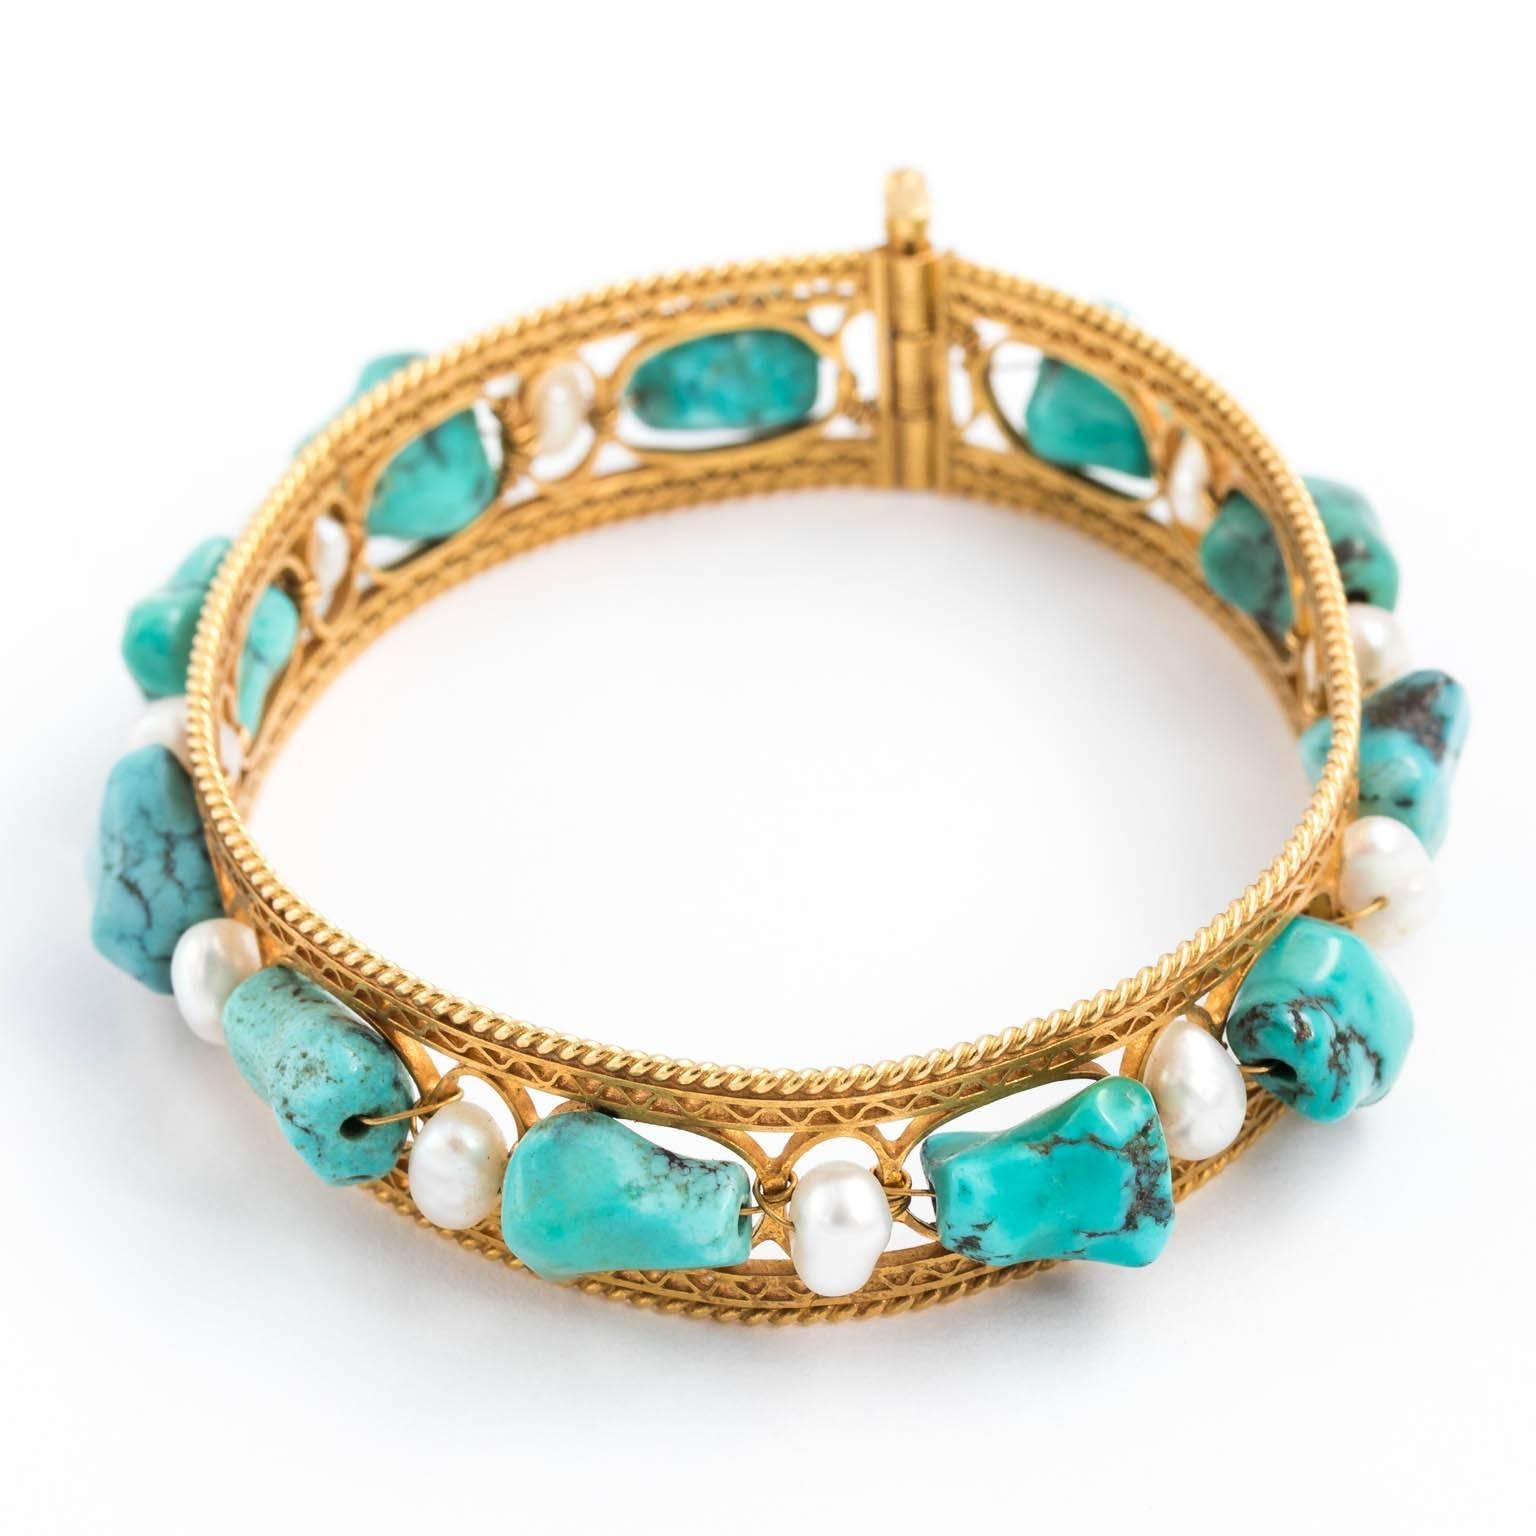 Women's Persian Gold, Turquoise and Pearl Bracelet